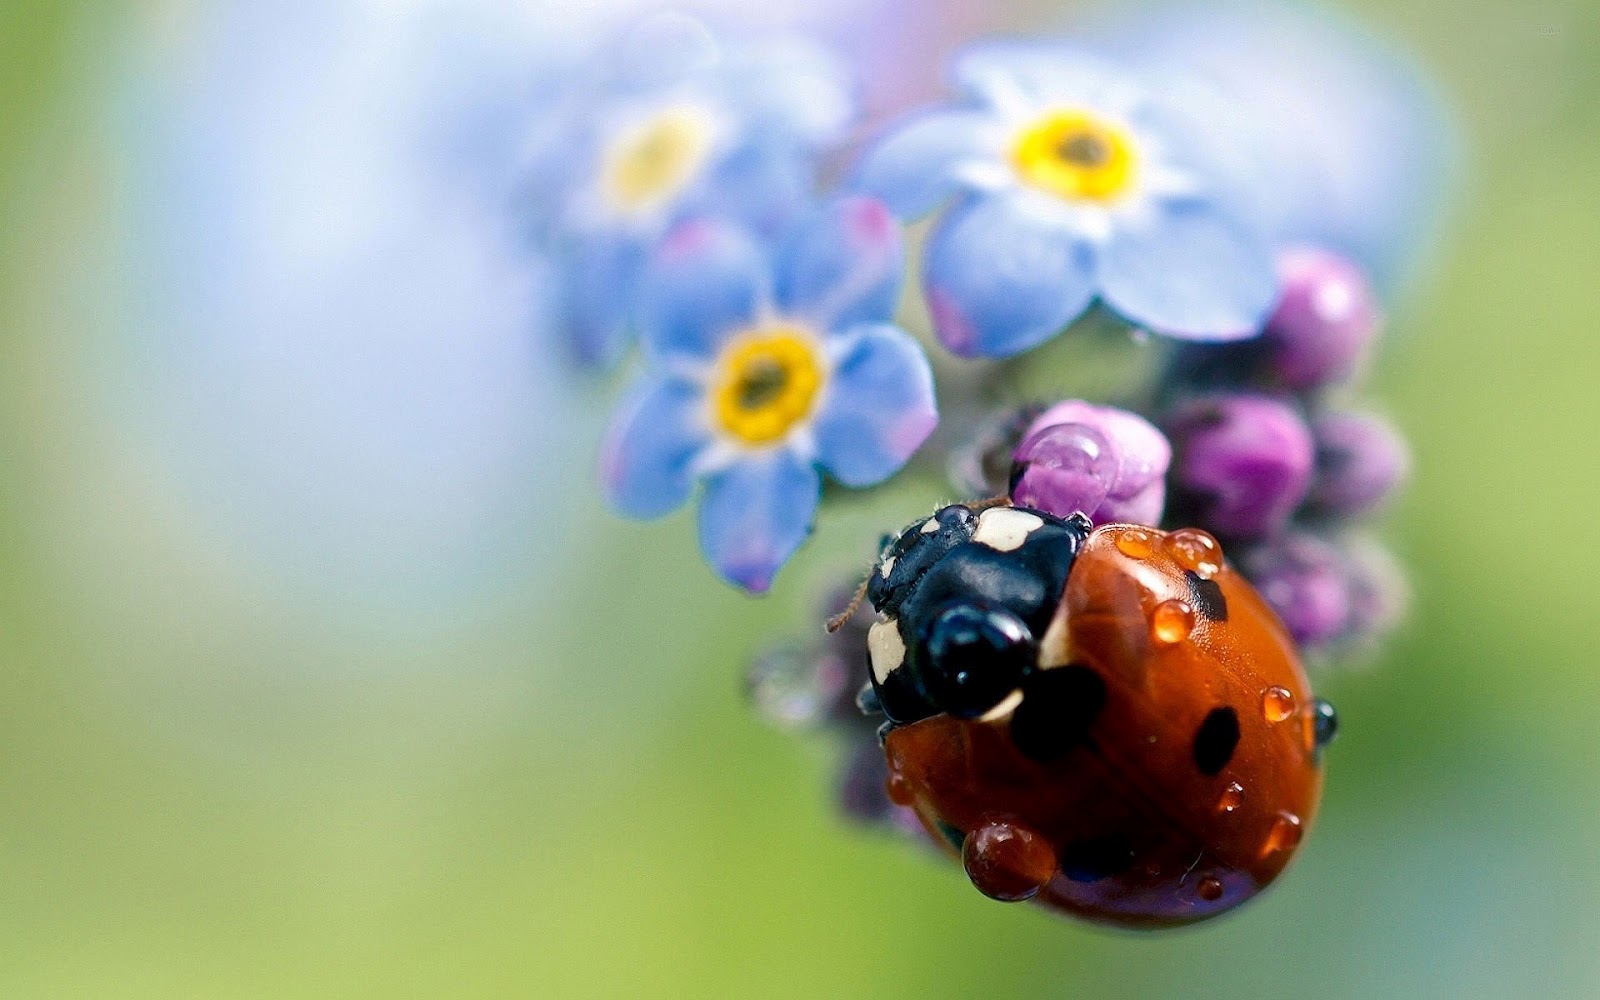 hd ladybug wallpaper with a ladybug sitting on a flower wallpapers